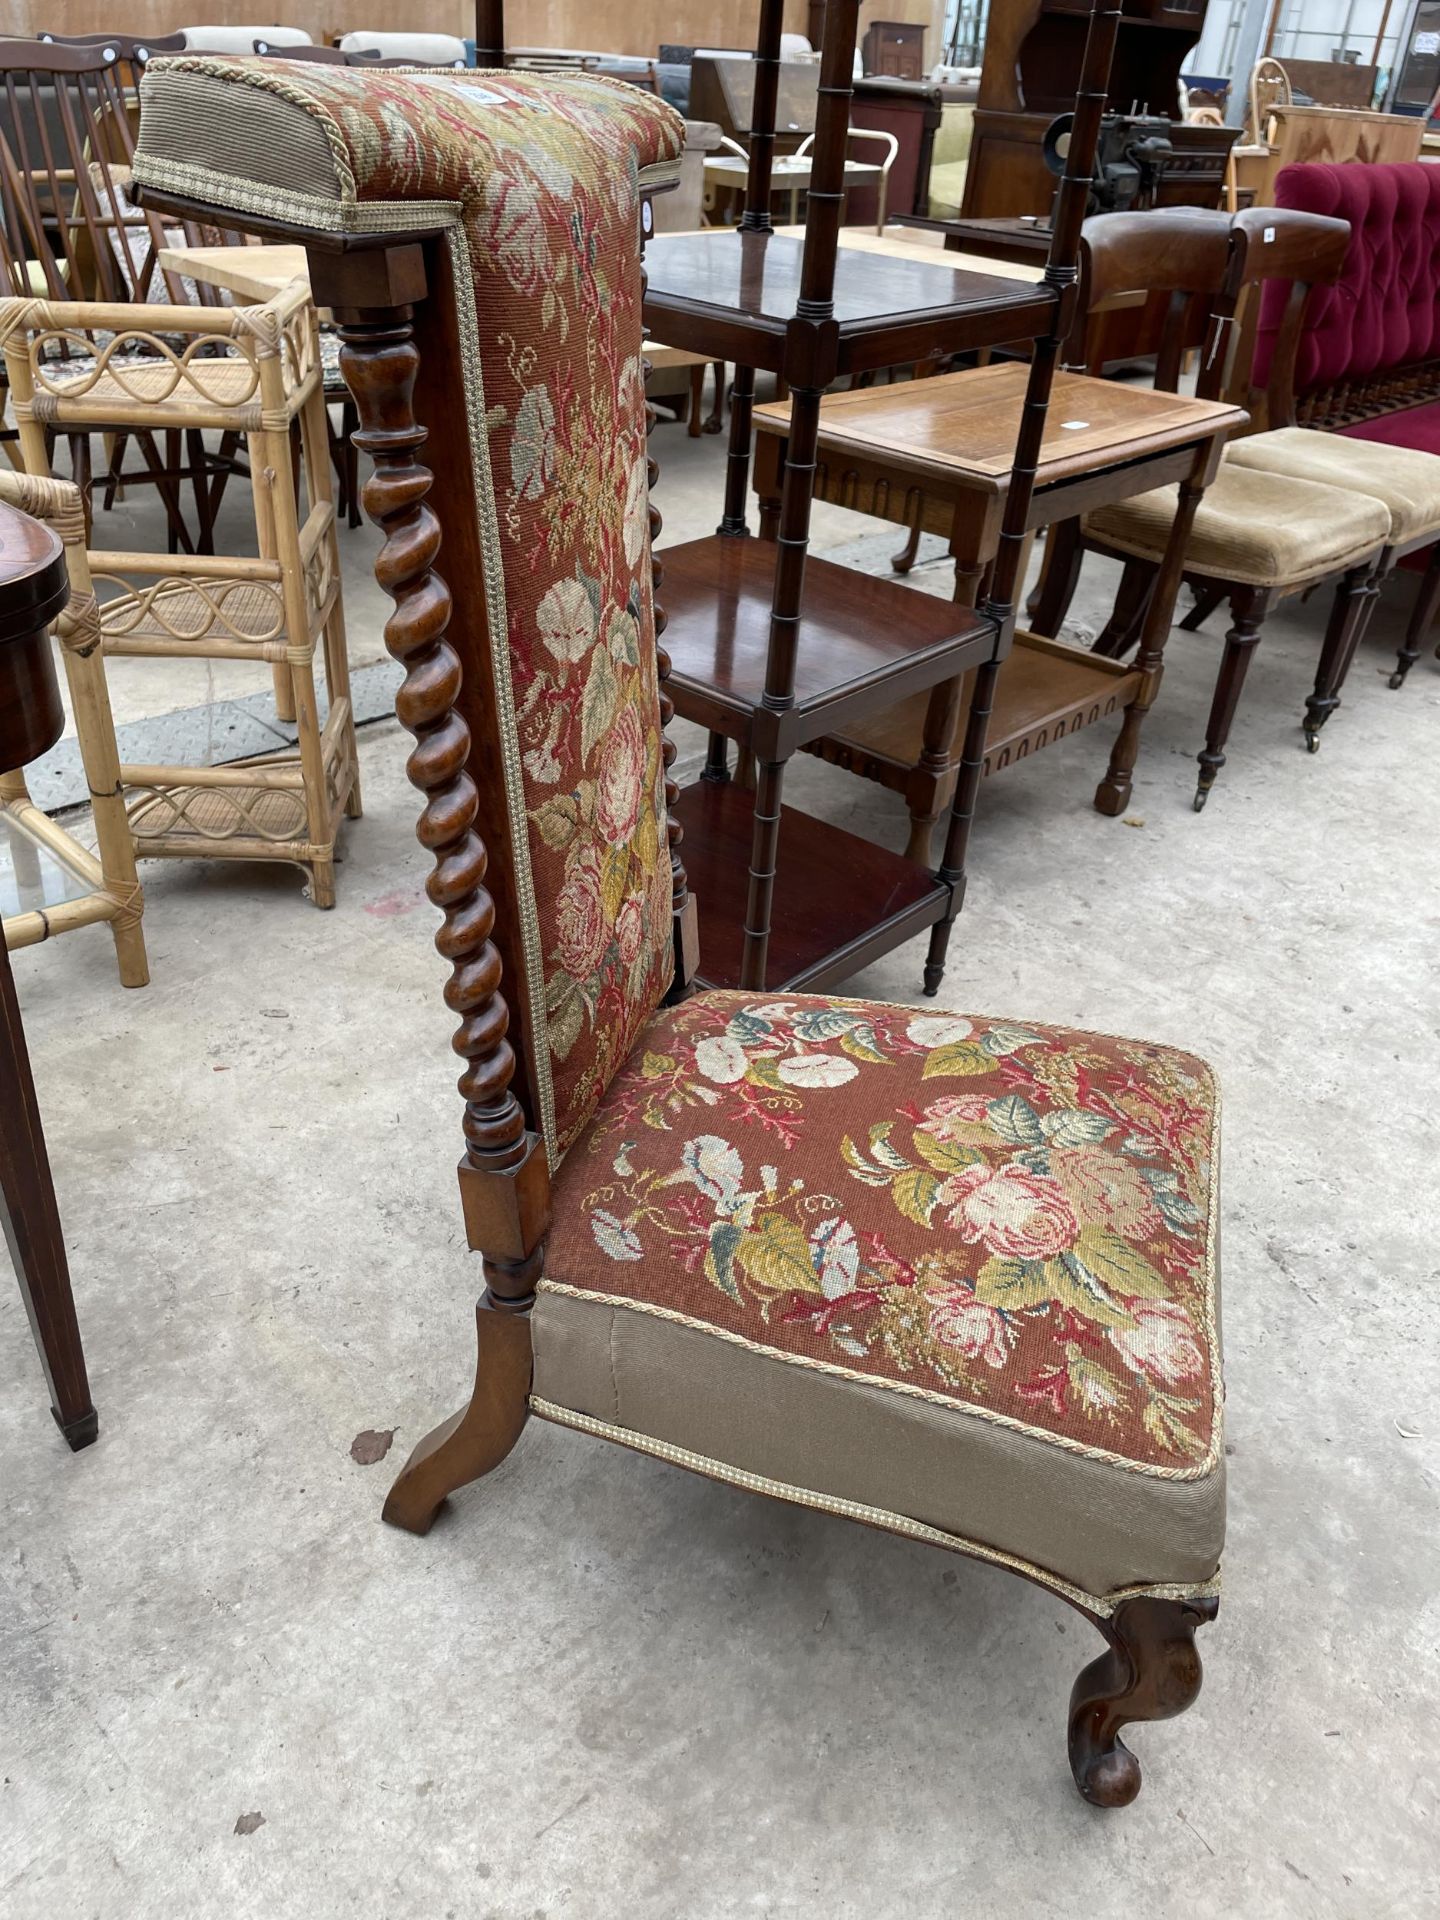 A VICTORIAN MAHOGANY PRIE DEU CHAIR WITH BARLEY TWIST UPRIGHTS AND WOOLWORK SEAT AND BACKS - Image 2 of 5